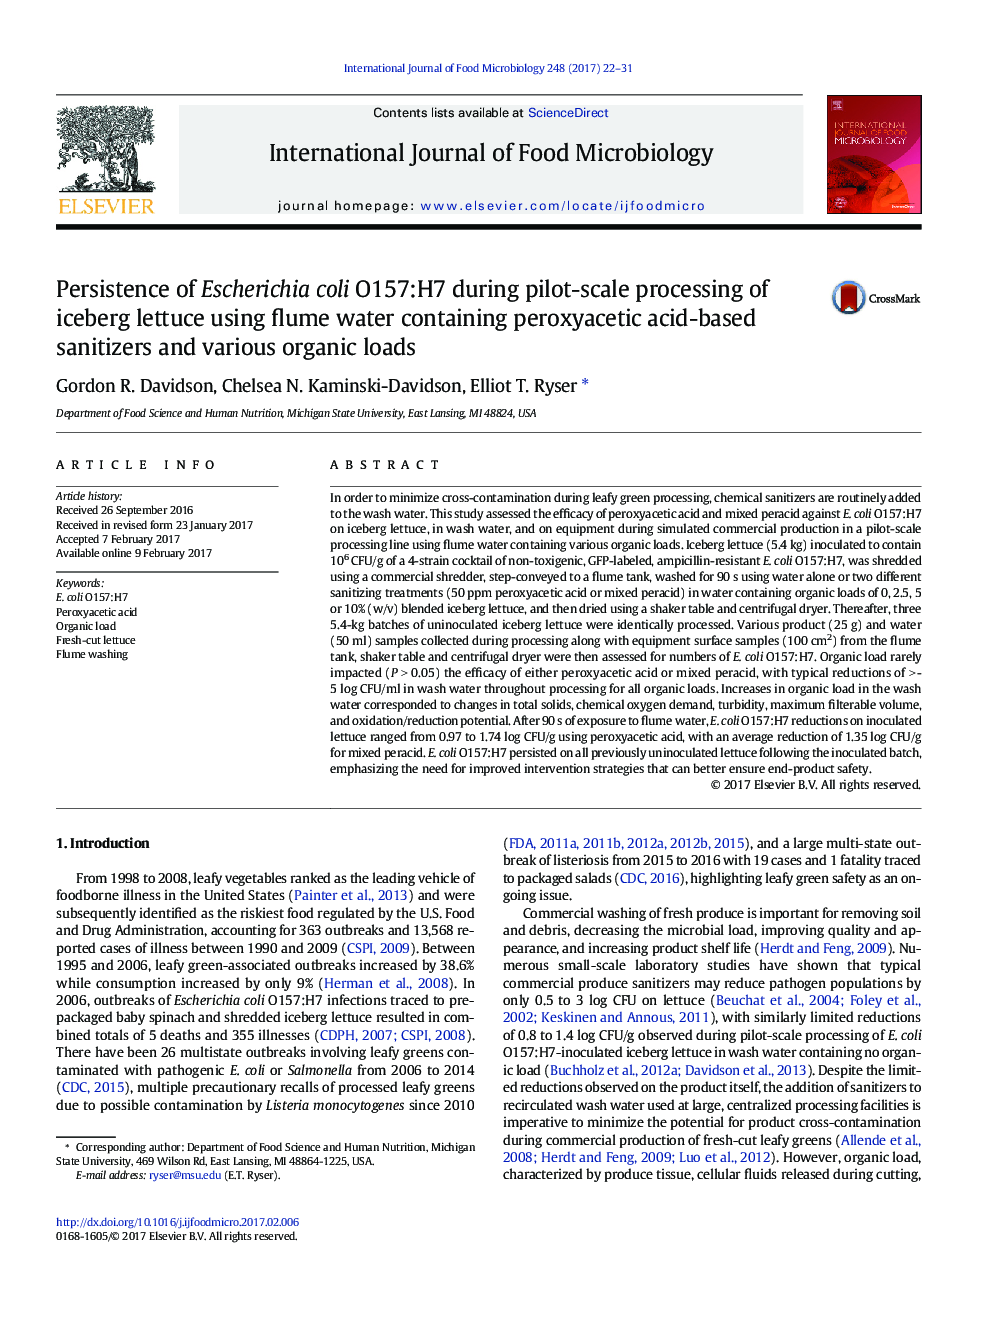 Persistence of Escherichia coli O157:H7 during pilot-scale processing of iceberg lettuce using flume water containing peroxyacetic acid-based sanitizers and various organic loads